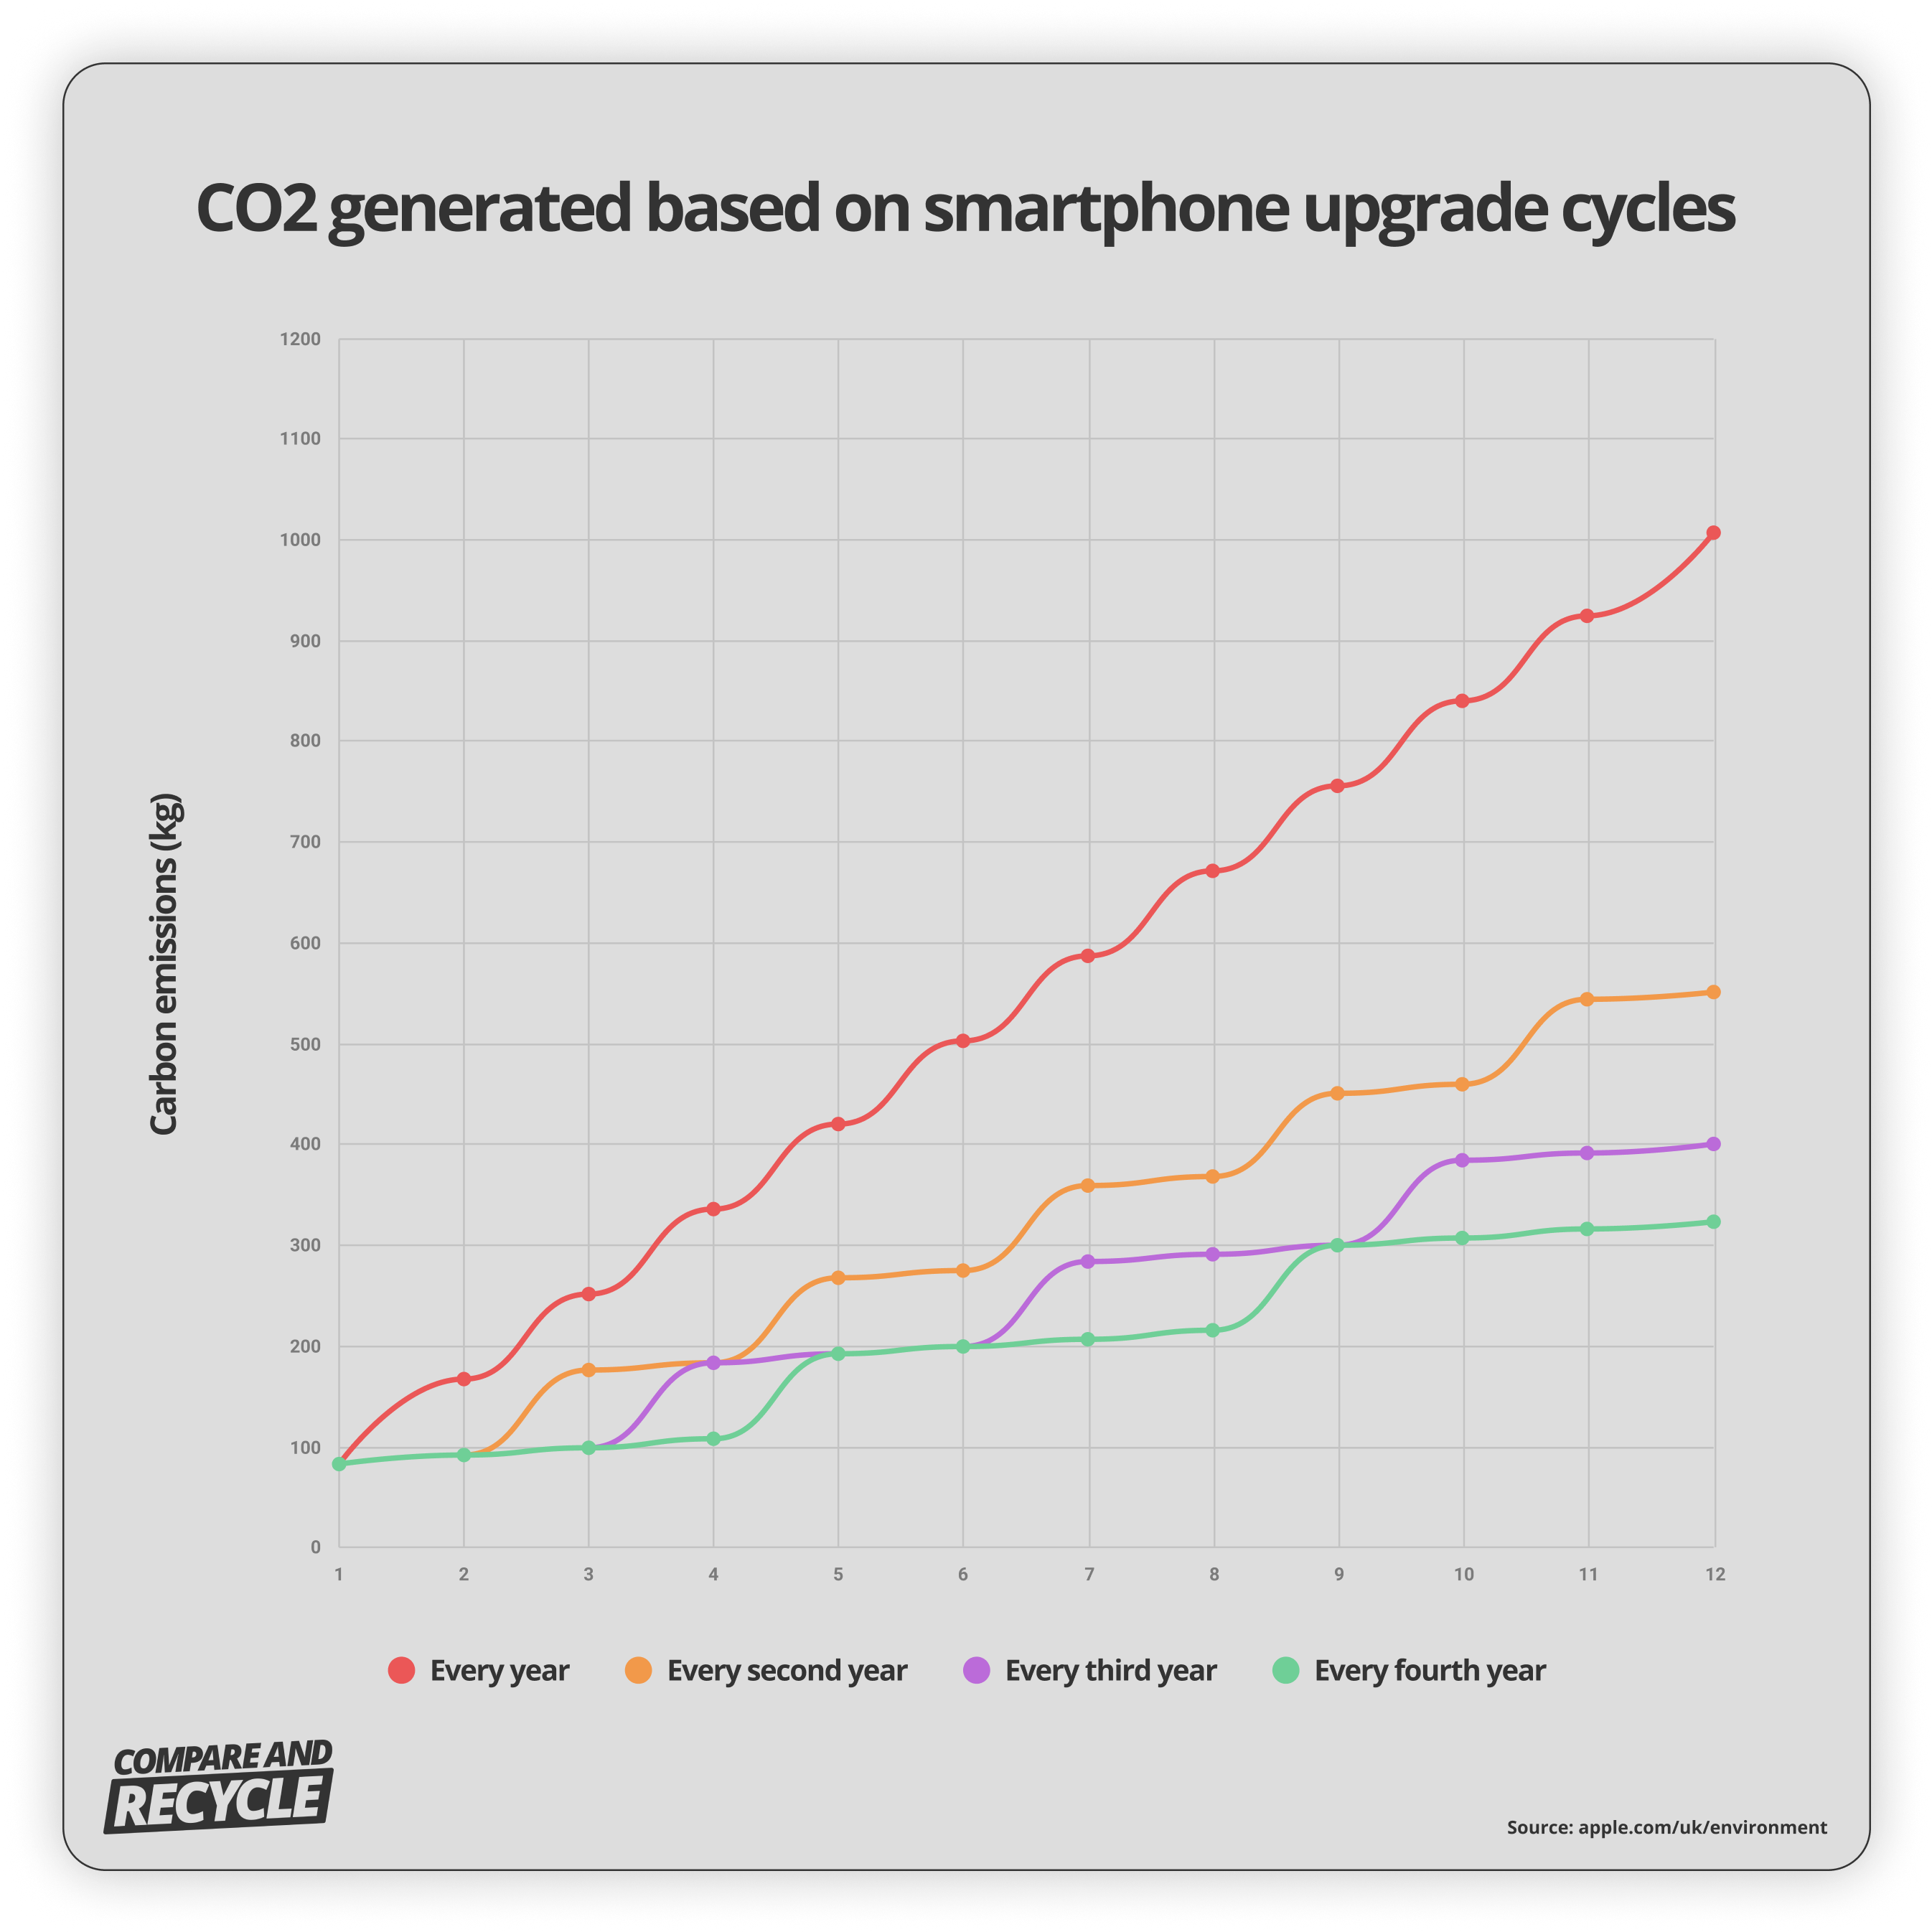 a linear graph showing carbon footprint of a smartphone based on different upgrade cycles